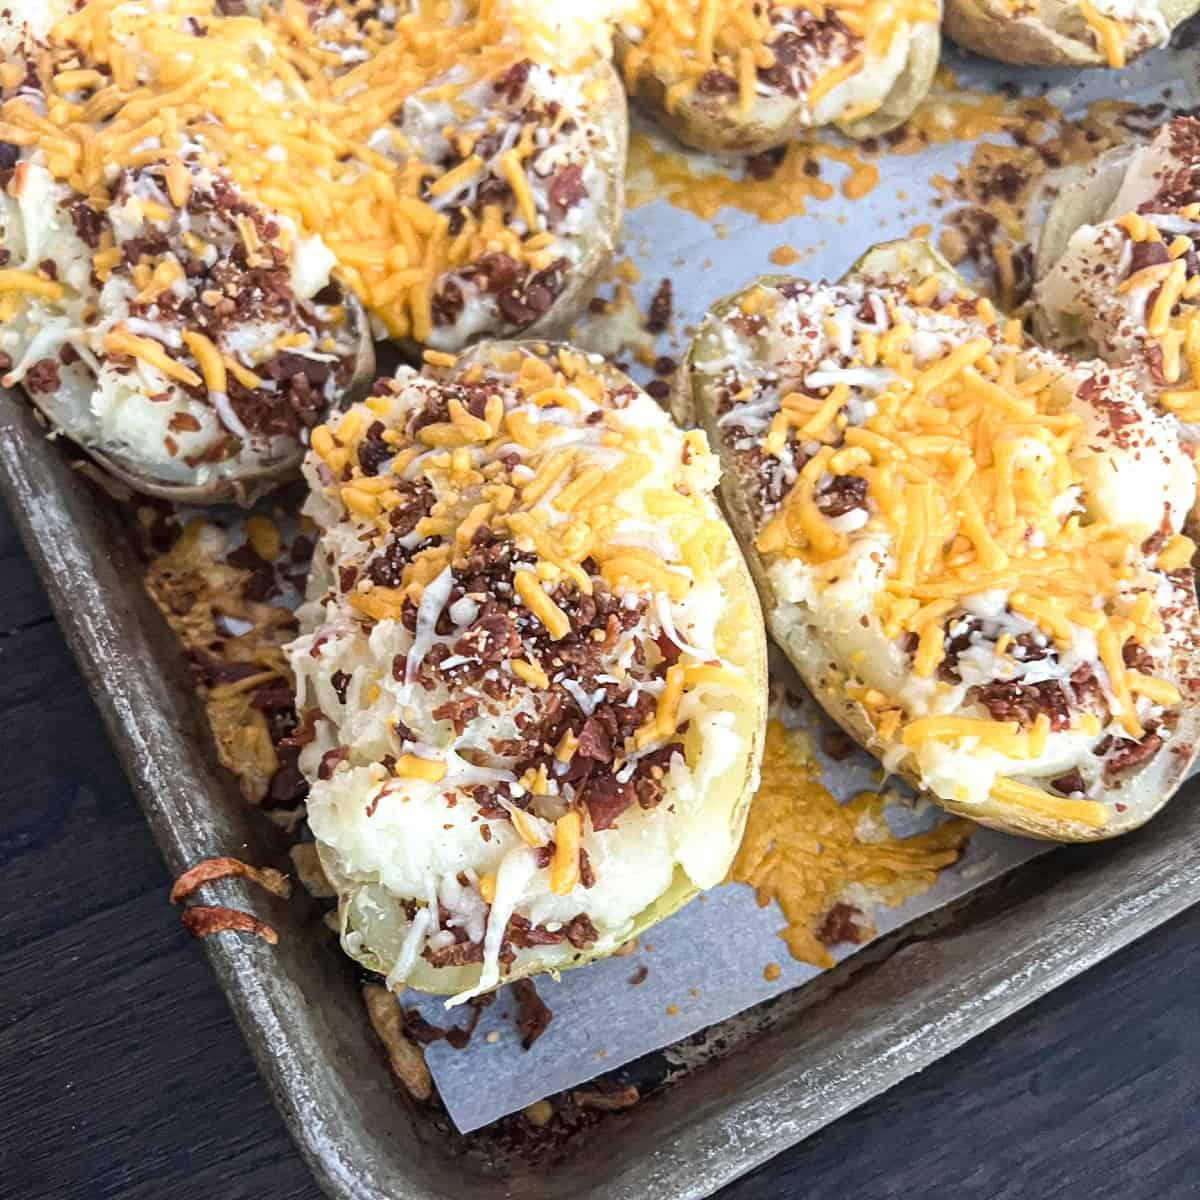 A close-up photo of  twice baked potatoes on a baking sheet. The potatoes are golden brown and crispy on top, and filled with a creamy mashed potato mixture. The mashed potatoes are topped with shredded cheese and bacon